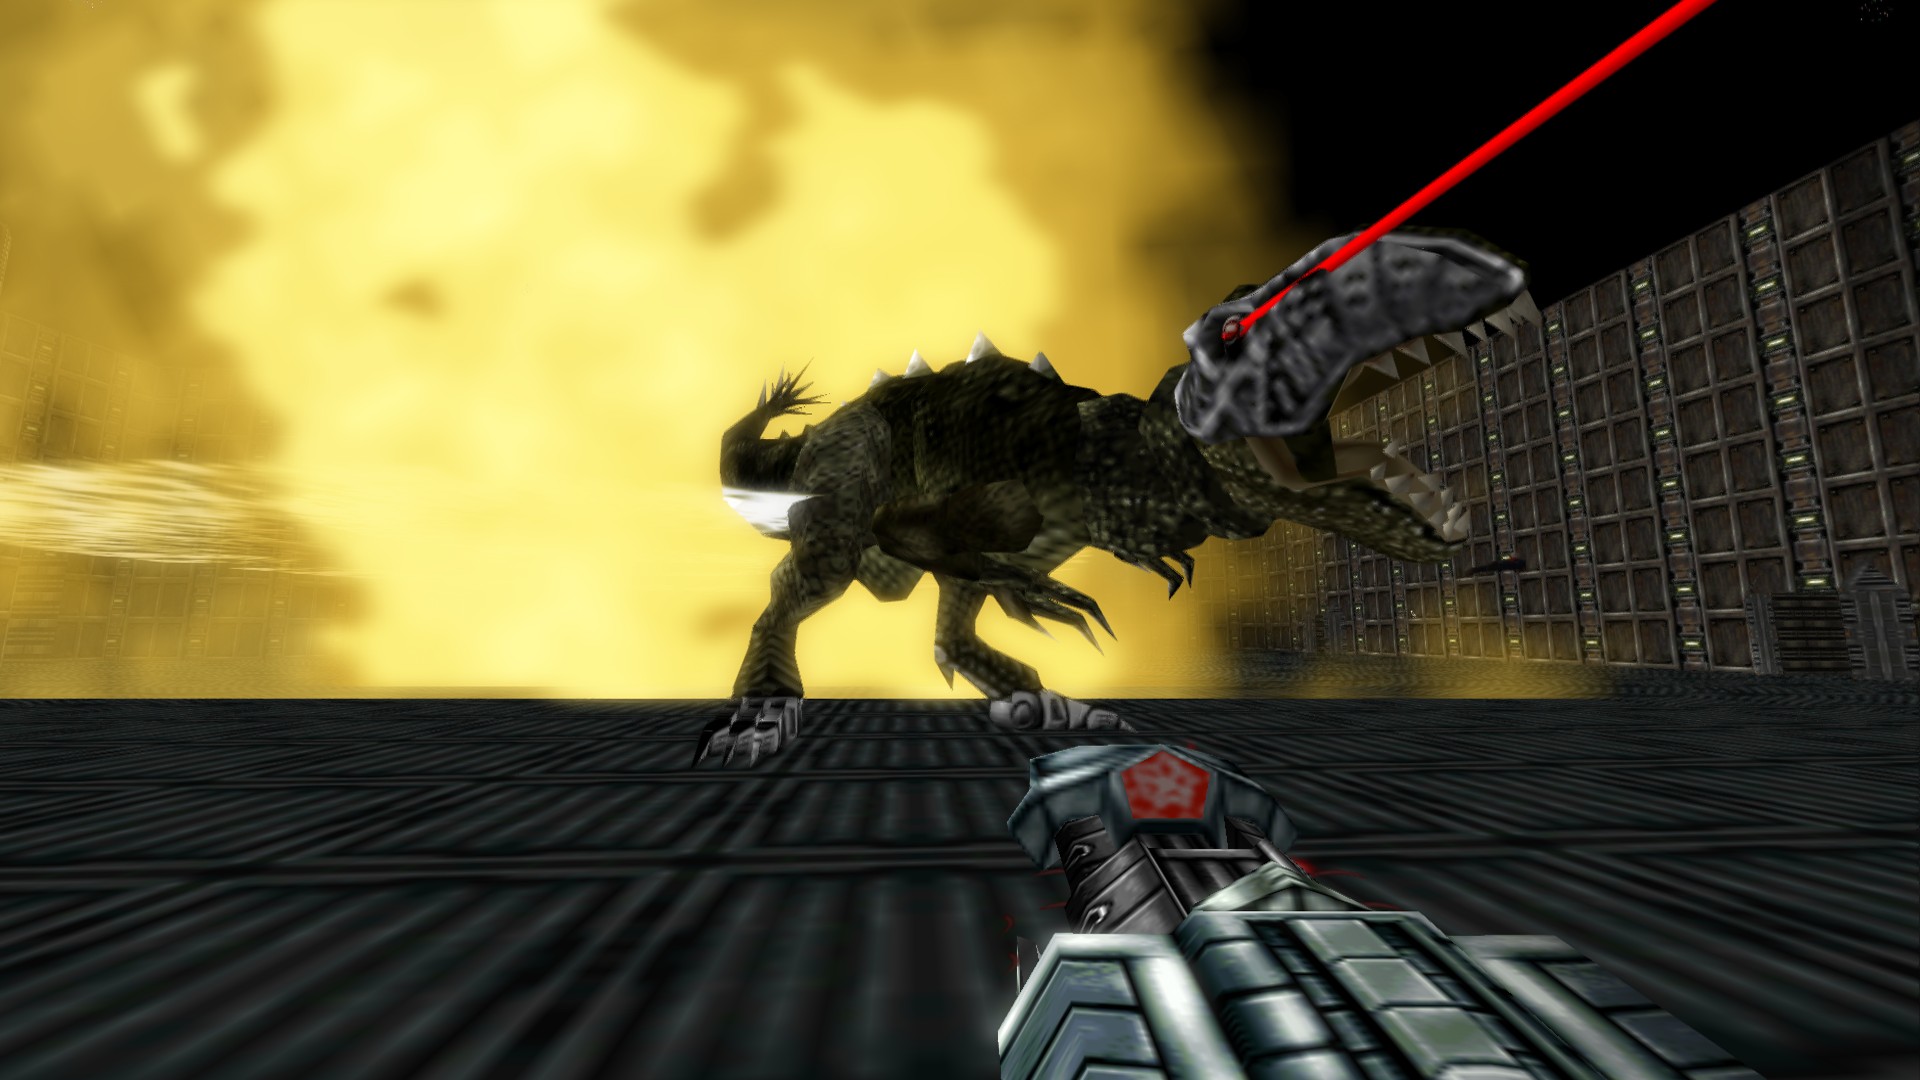 Remastered Classics Turok and Turok 2 Available Now on Xbox One